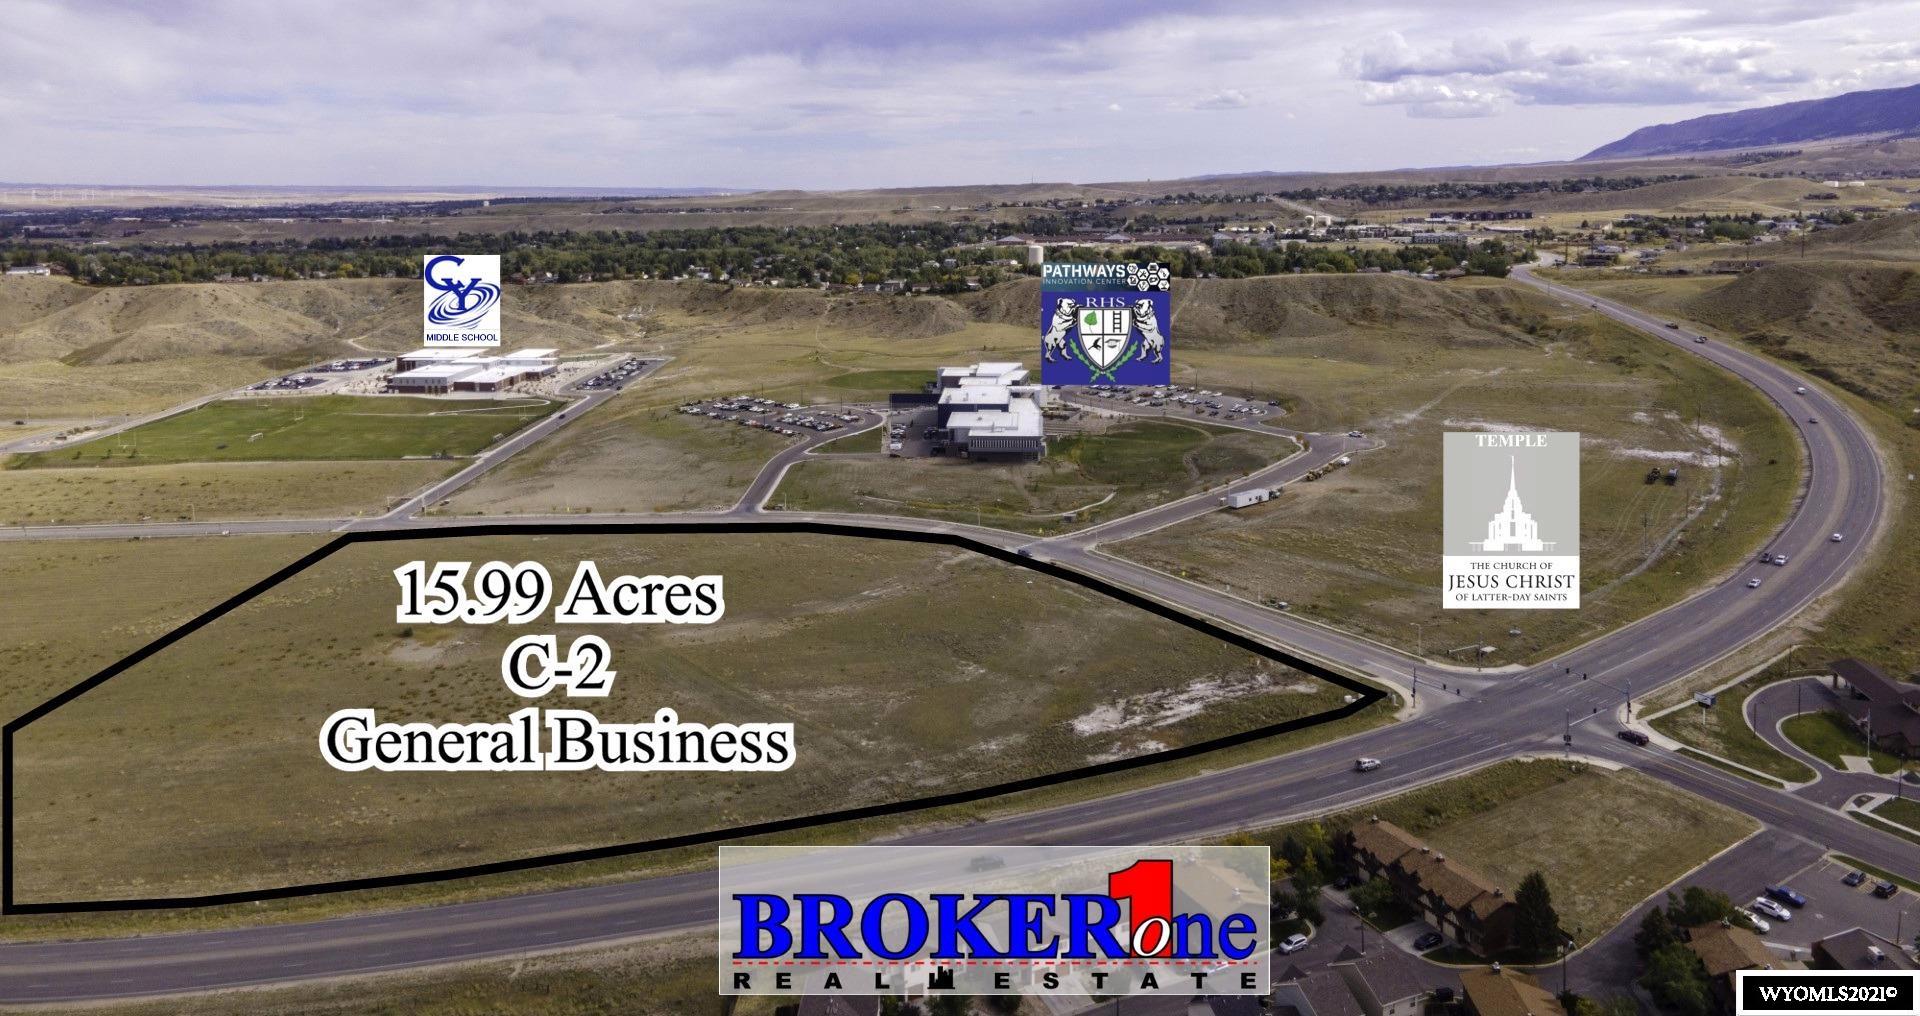 15.99 acres of fully developed, masterplanned commercial land ready for vertical construction.  Walmart SuperCenter, Studio City at Mesa 10-screen digital theater, City Brew Coffee, Fuzzy’s Tacos, Mesa Primary Care, Reliant Federal Credit Union, McDonald’s, Taco Johns, Aaron’s Rents, AT&T , Casper Orthopedics and the LDS Temple (now under construction) are adjacent to or in close proximity. The Mesa, located in one of the most accessible parts of the city, is a 179-acre mixed use development.  Existing pads range in size from 29,507 sqft to 95,168 sqft and benefit from heavy local vehicular traffic and excellent visibility.  Parcels in this package can be combined up to 15.99 acres.   A separate package of 16.27 acres can also be acquired to create a combined commercial development of 26.84 contiguous acres.  Individual parcels are available at retail prices.  Contact Listing Broker for Offering Memorandum on individual parcels.